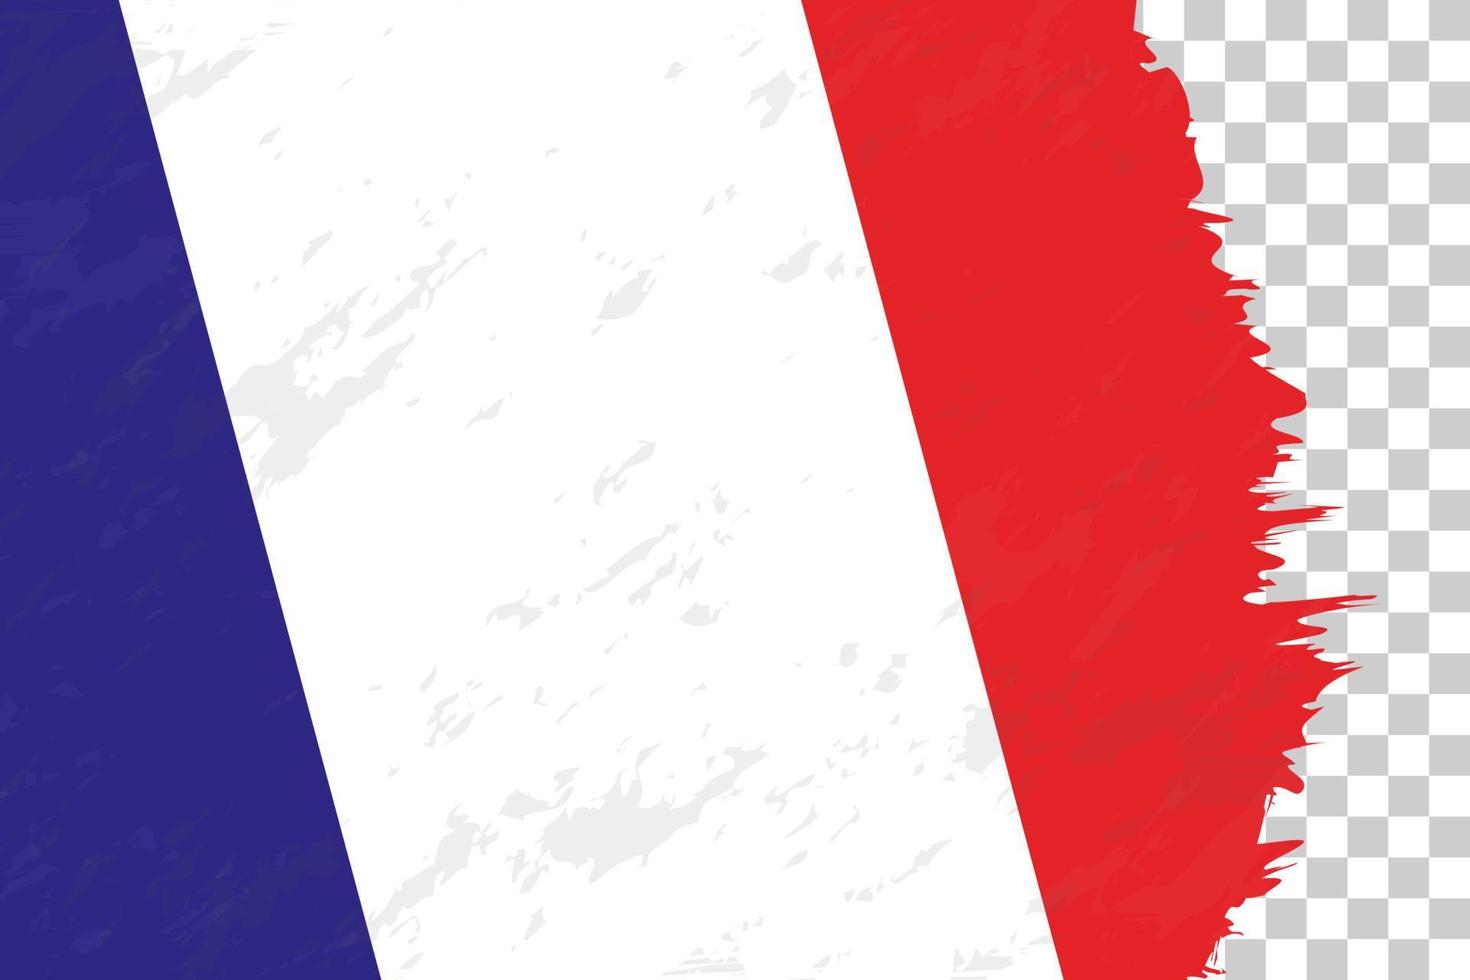 Horizontal Abstract Grunge Brushed Flag of France on Transparent Grid. vector